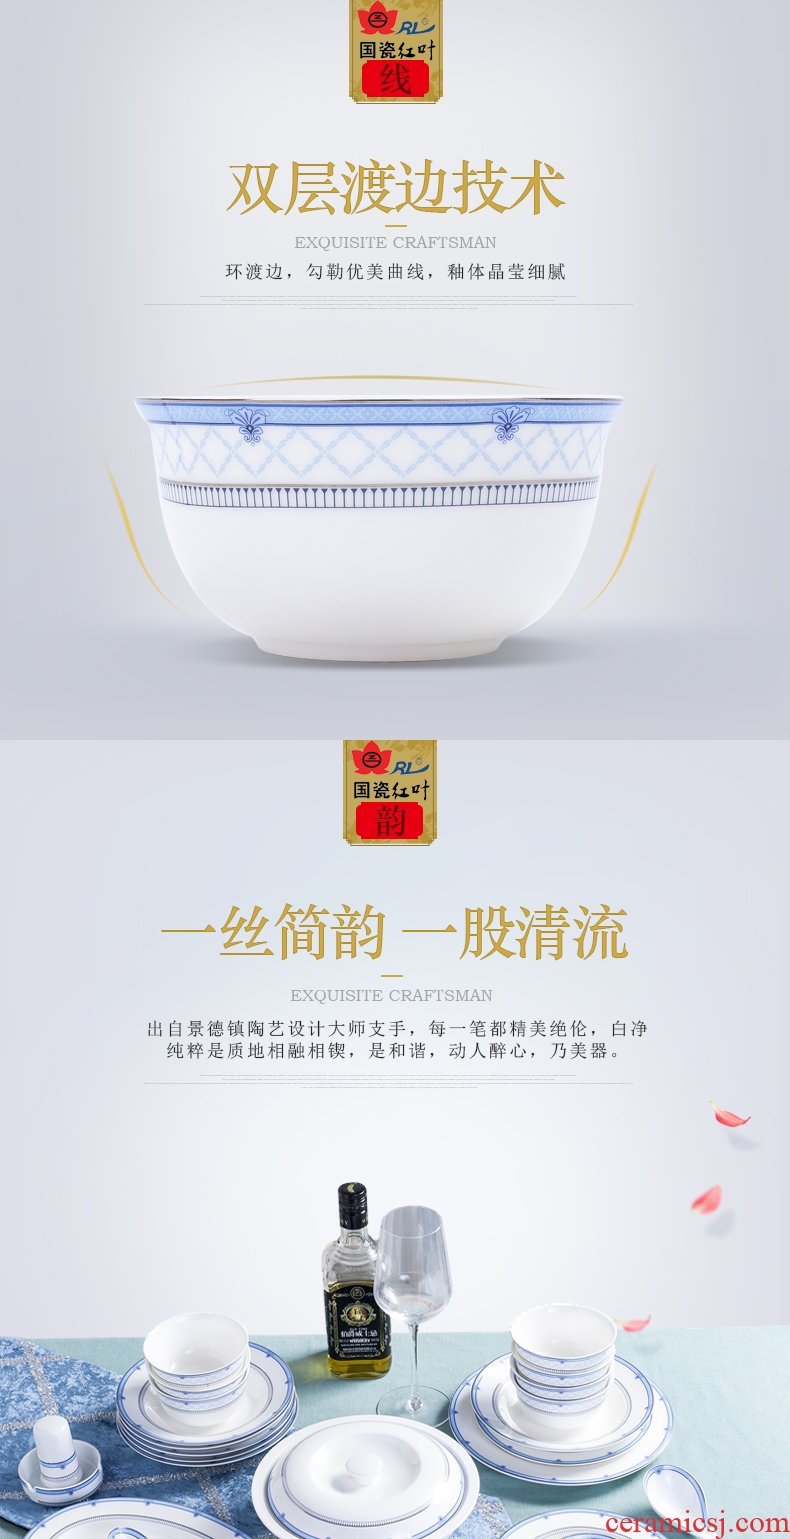 Red leaves jingdezhen ceramic tableware home dishes suit contracted Europe type ipads porcelain ceramics as navy